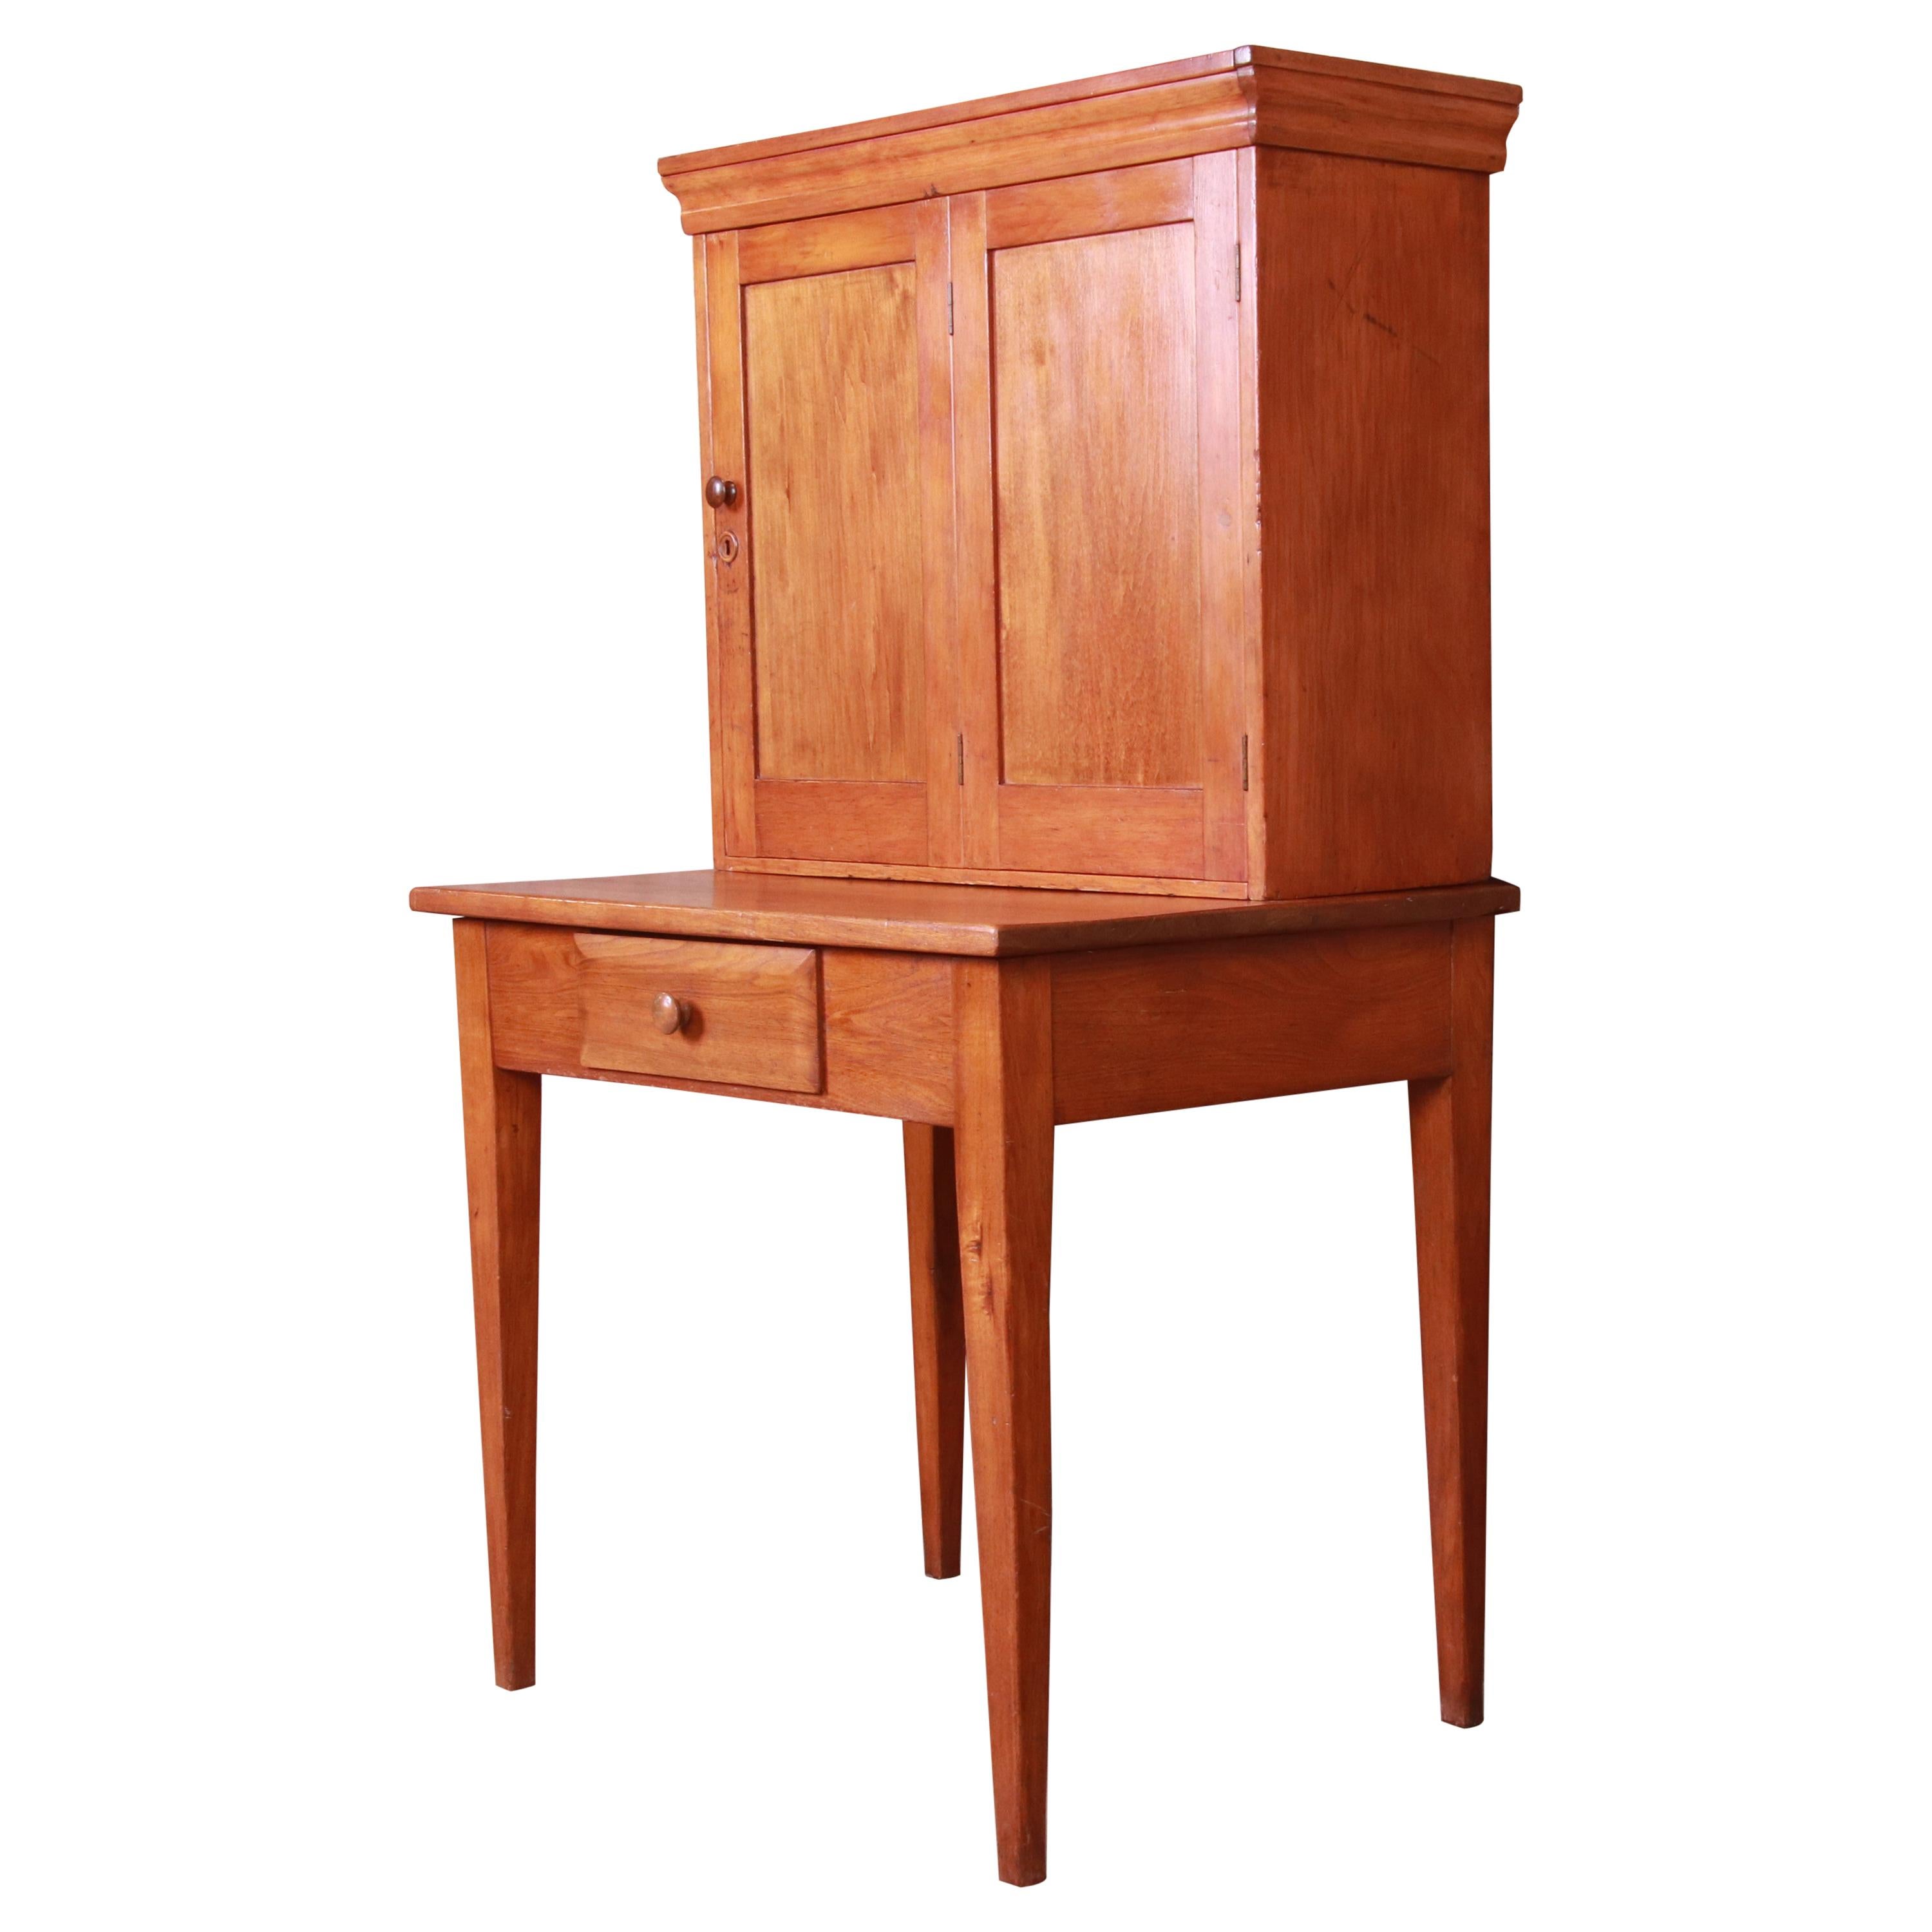 Antique Pine Postmaster Desk with Fitted Interior, Circa 1840s